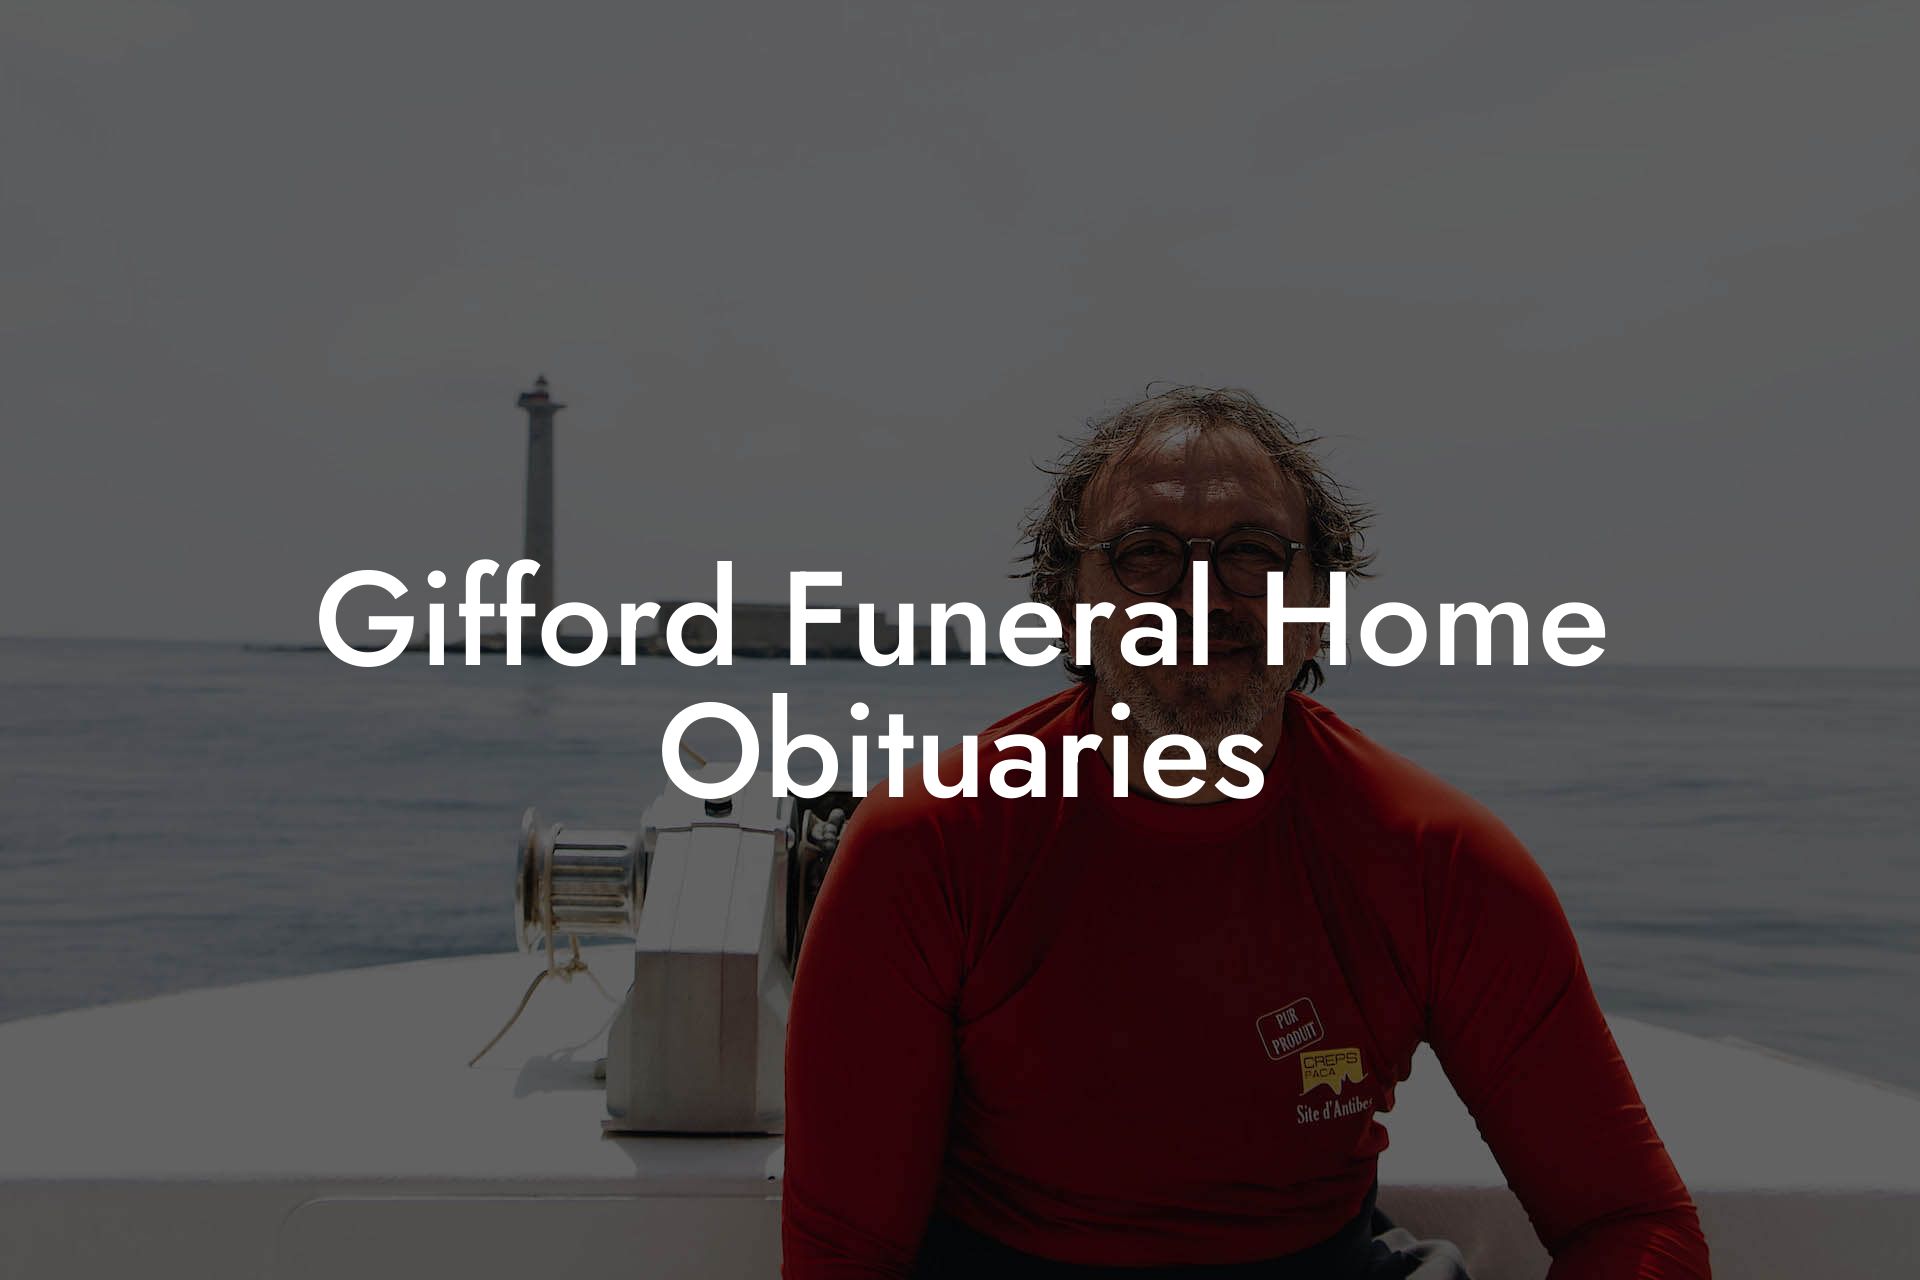 Gifford Funeral Home Obituaries